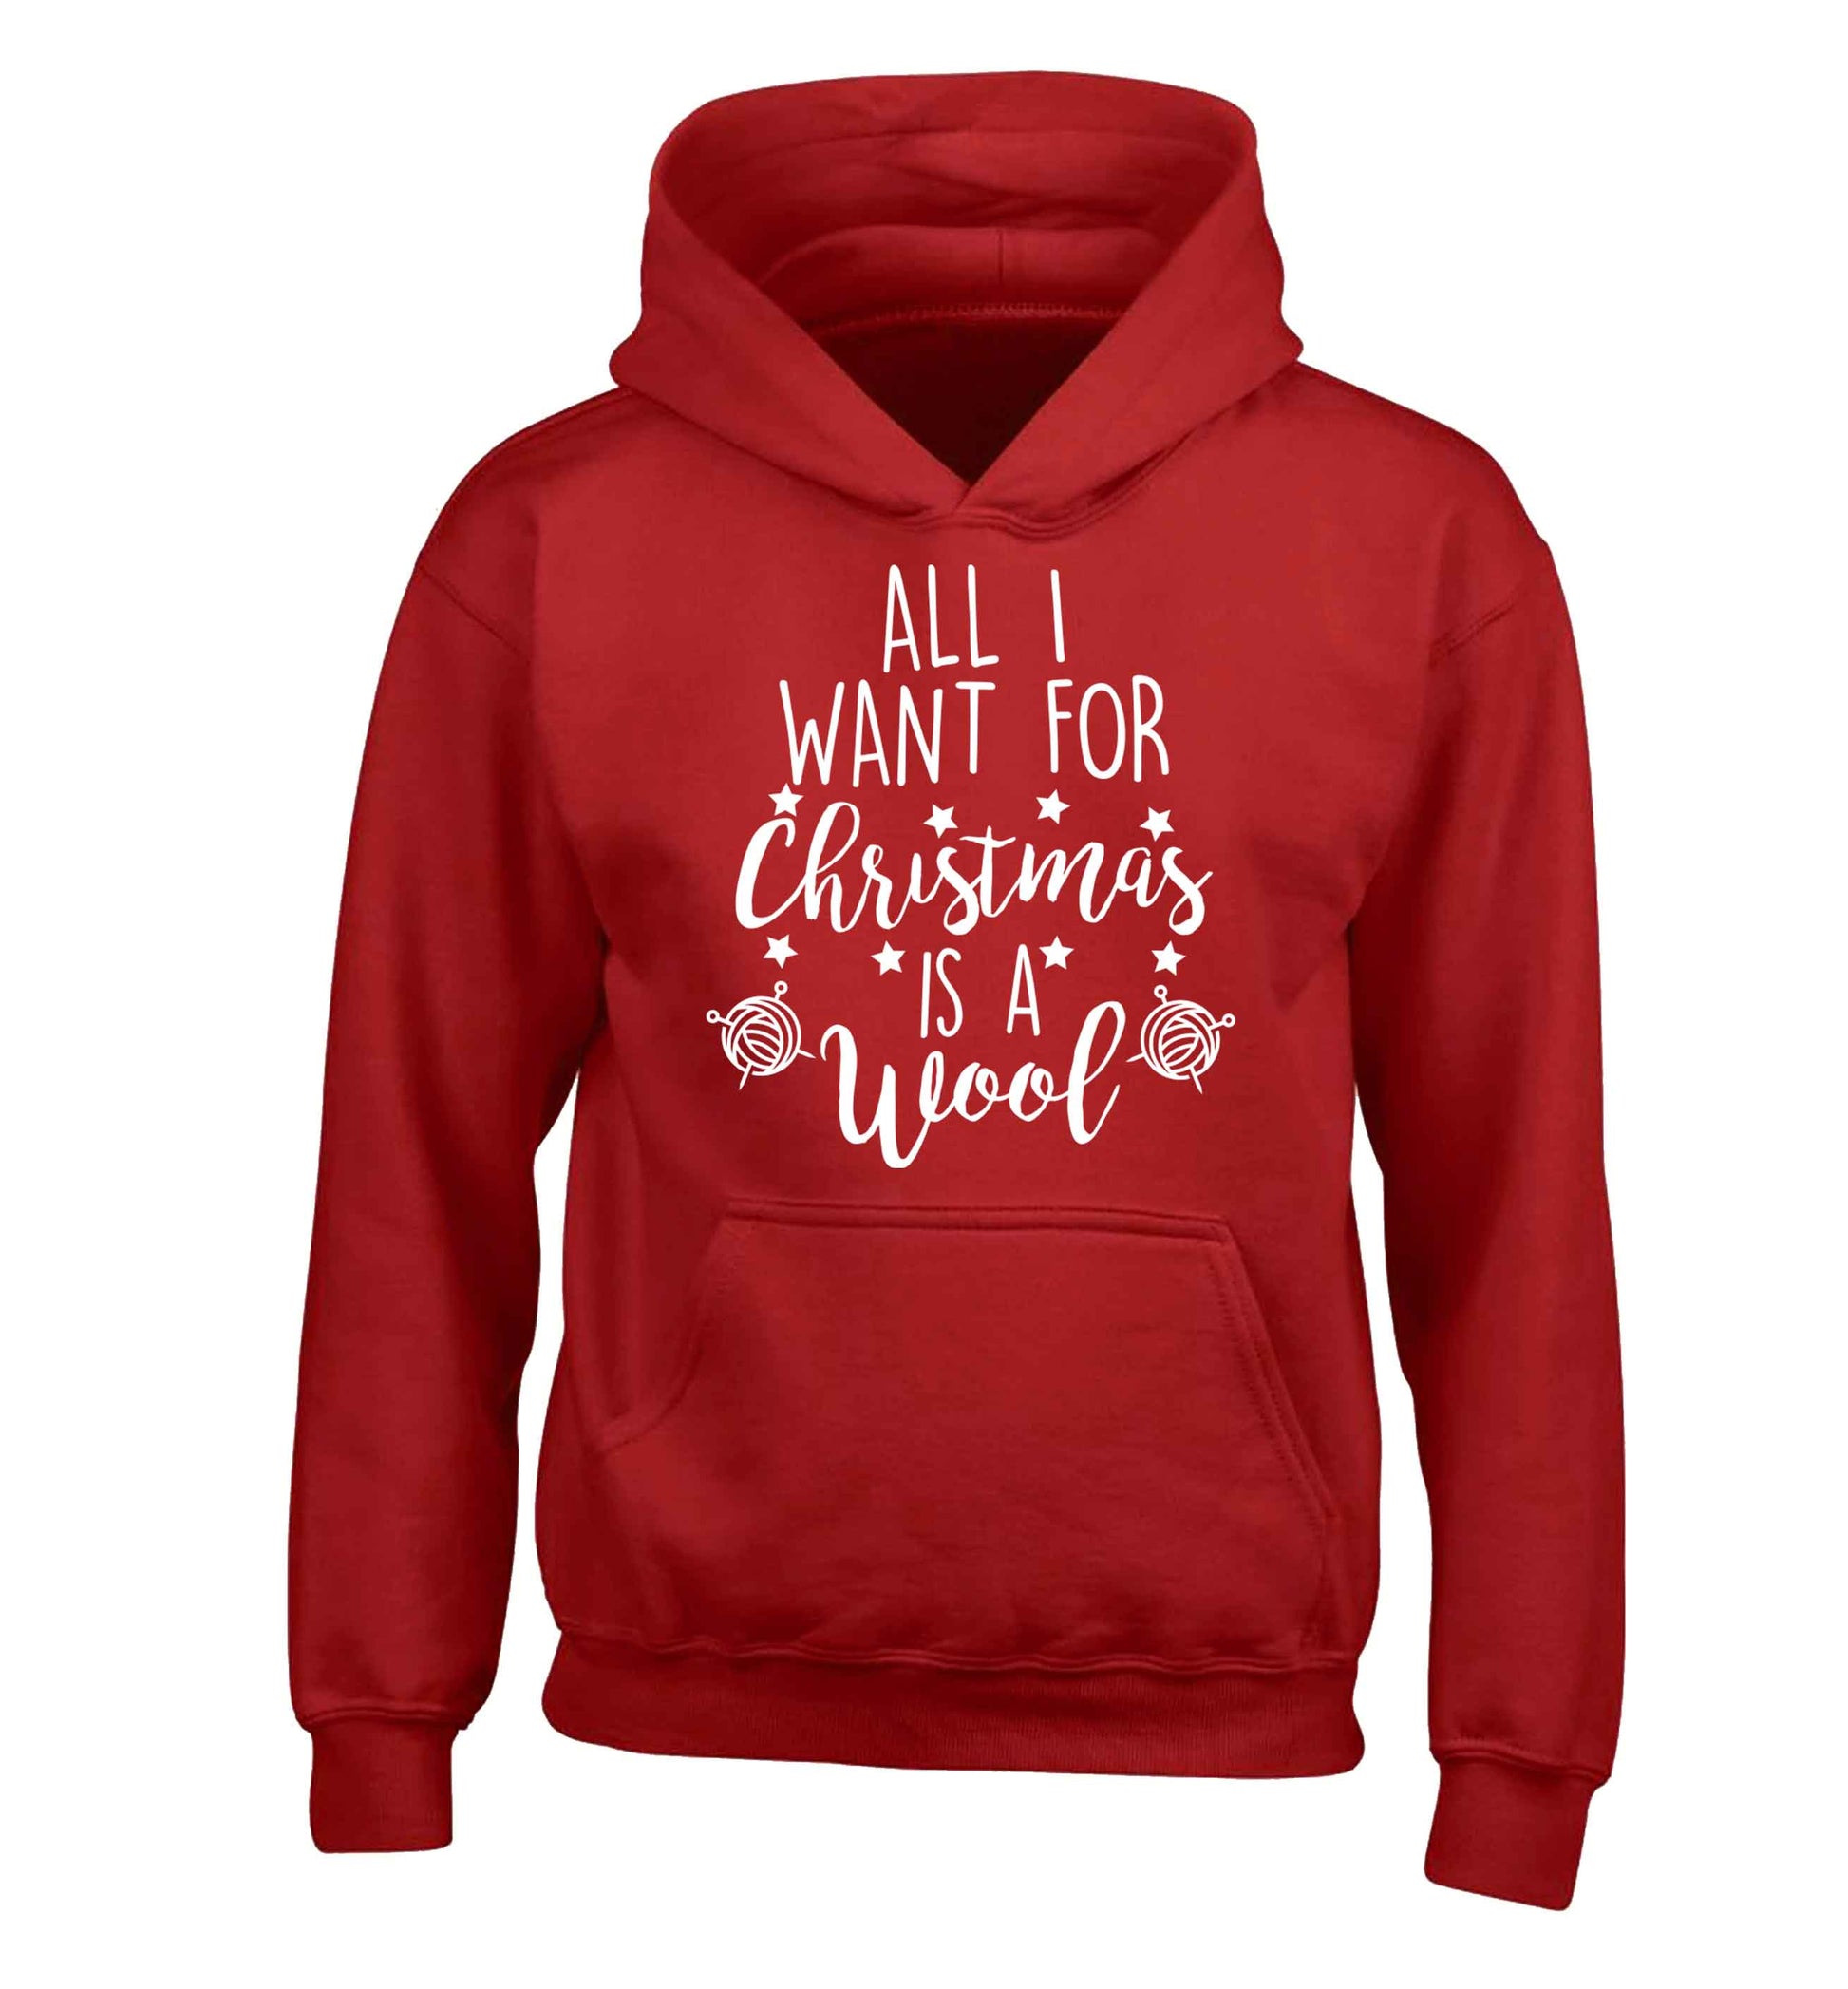 All I want for Christmas is wool! children's red hoodie 12-13 Years